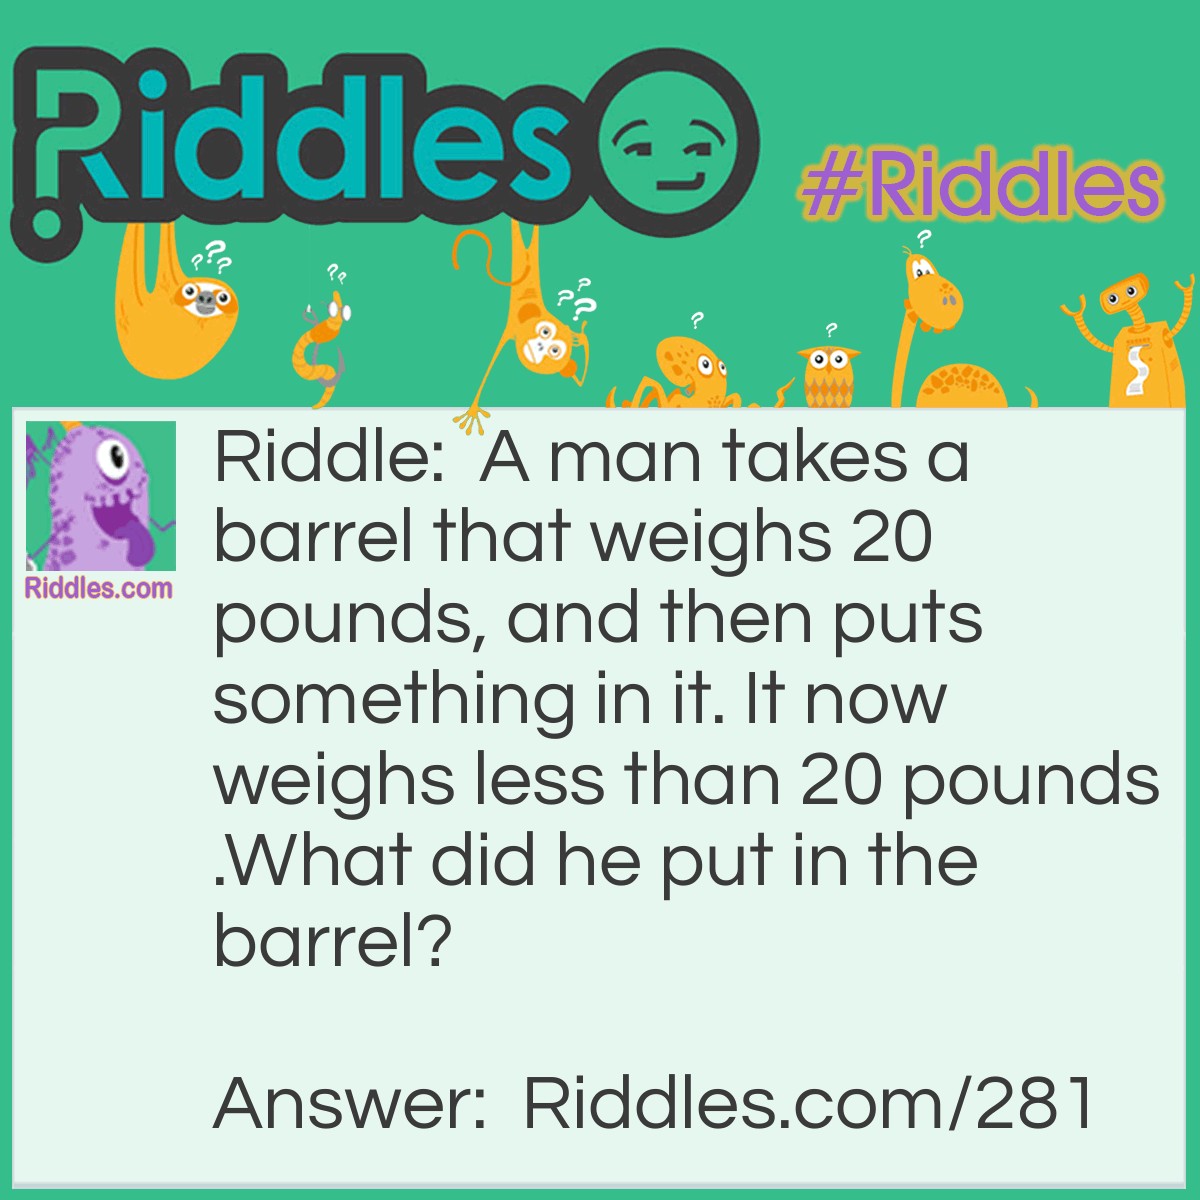 Riddle: A man takes a barrel that weighs 20 pounds, and then puts something in it. It now weighs less than 20 pounds.

What did he put in the barrel? Answer: He put a hole in the barrel to make it weigh less.